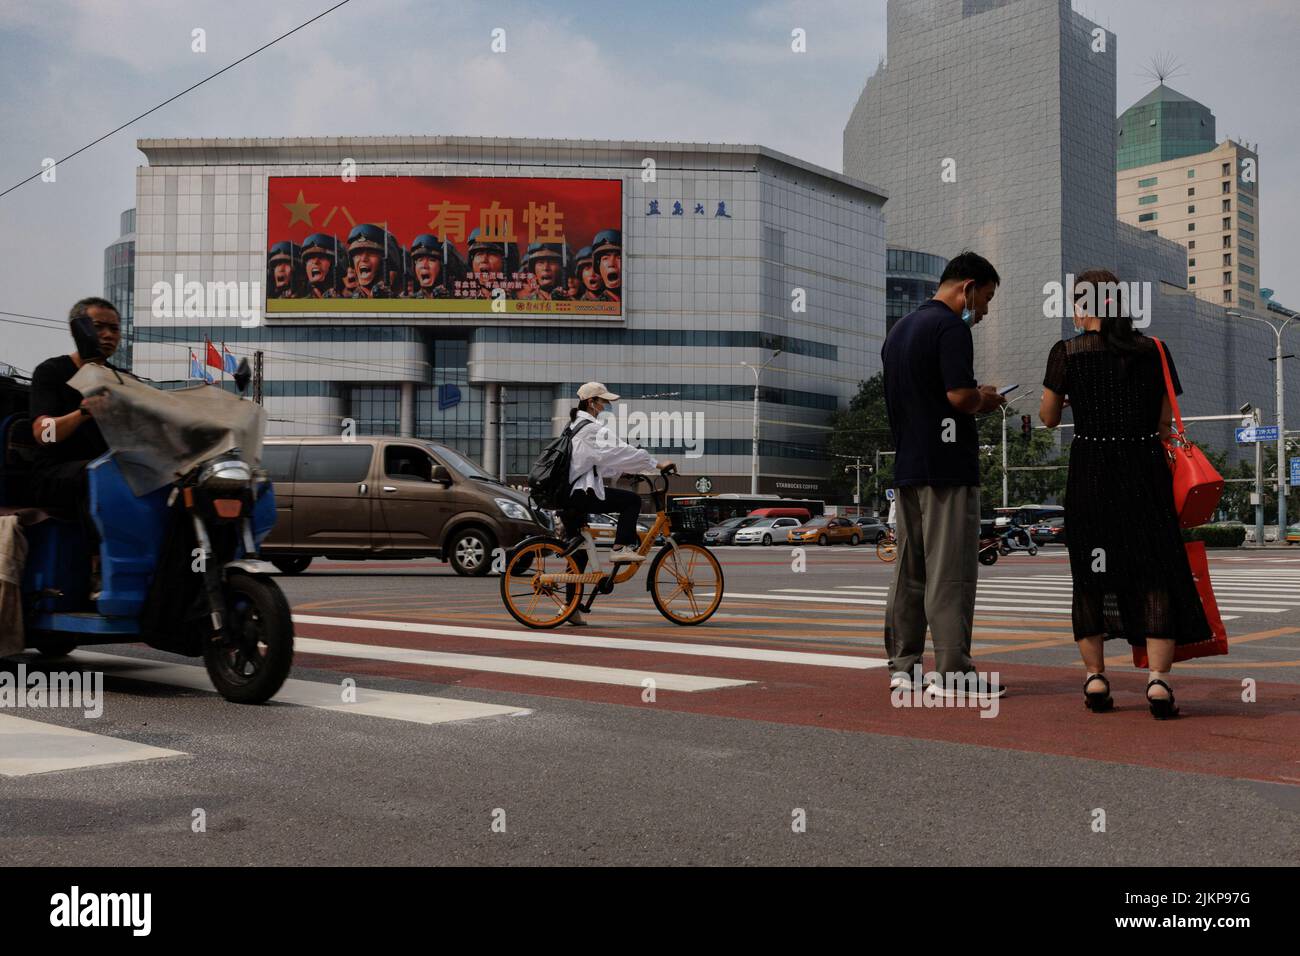 People wait at a traffic light near an image of Chinese People's Liberation Army (PLA) soldiers in Beijing, China, August 3, 2022.   REUTERS/Thomas Peter Stock Photo